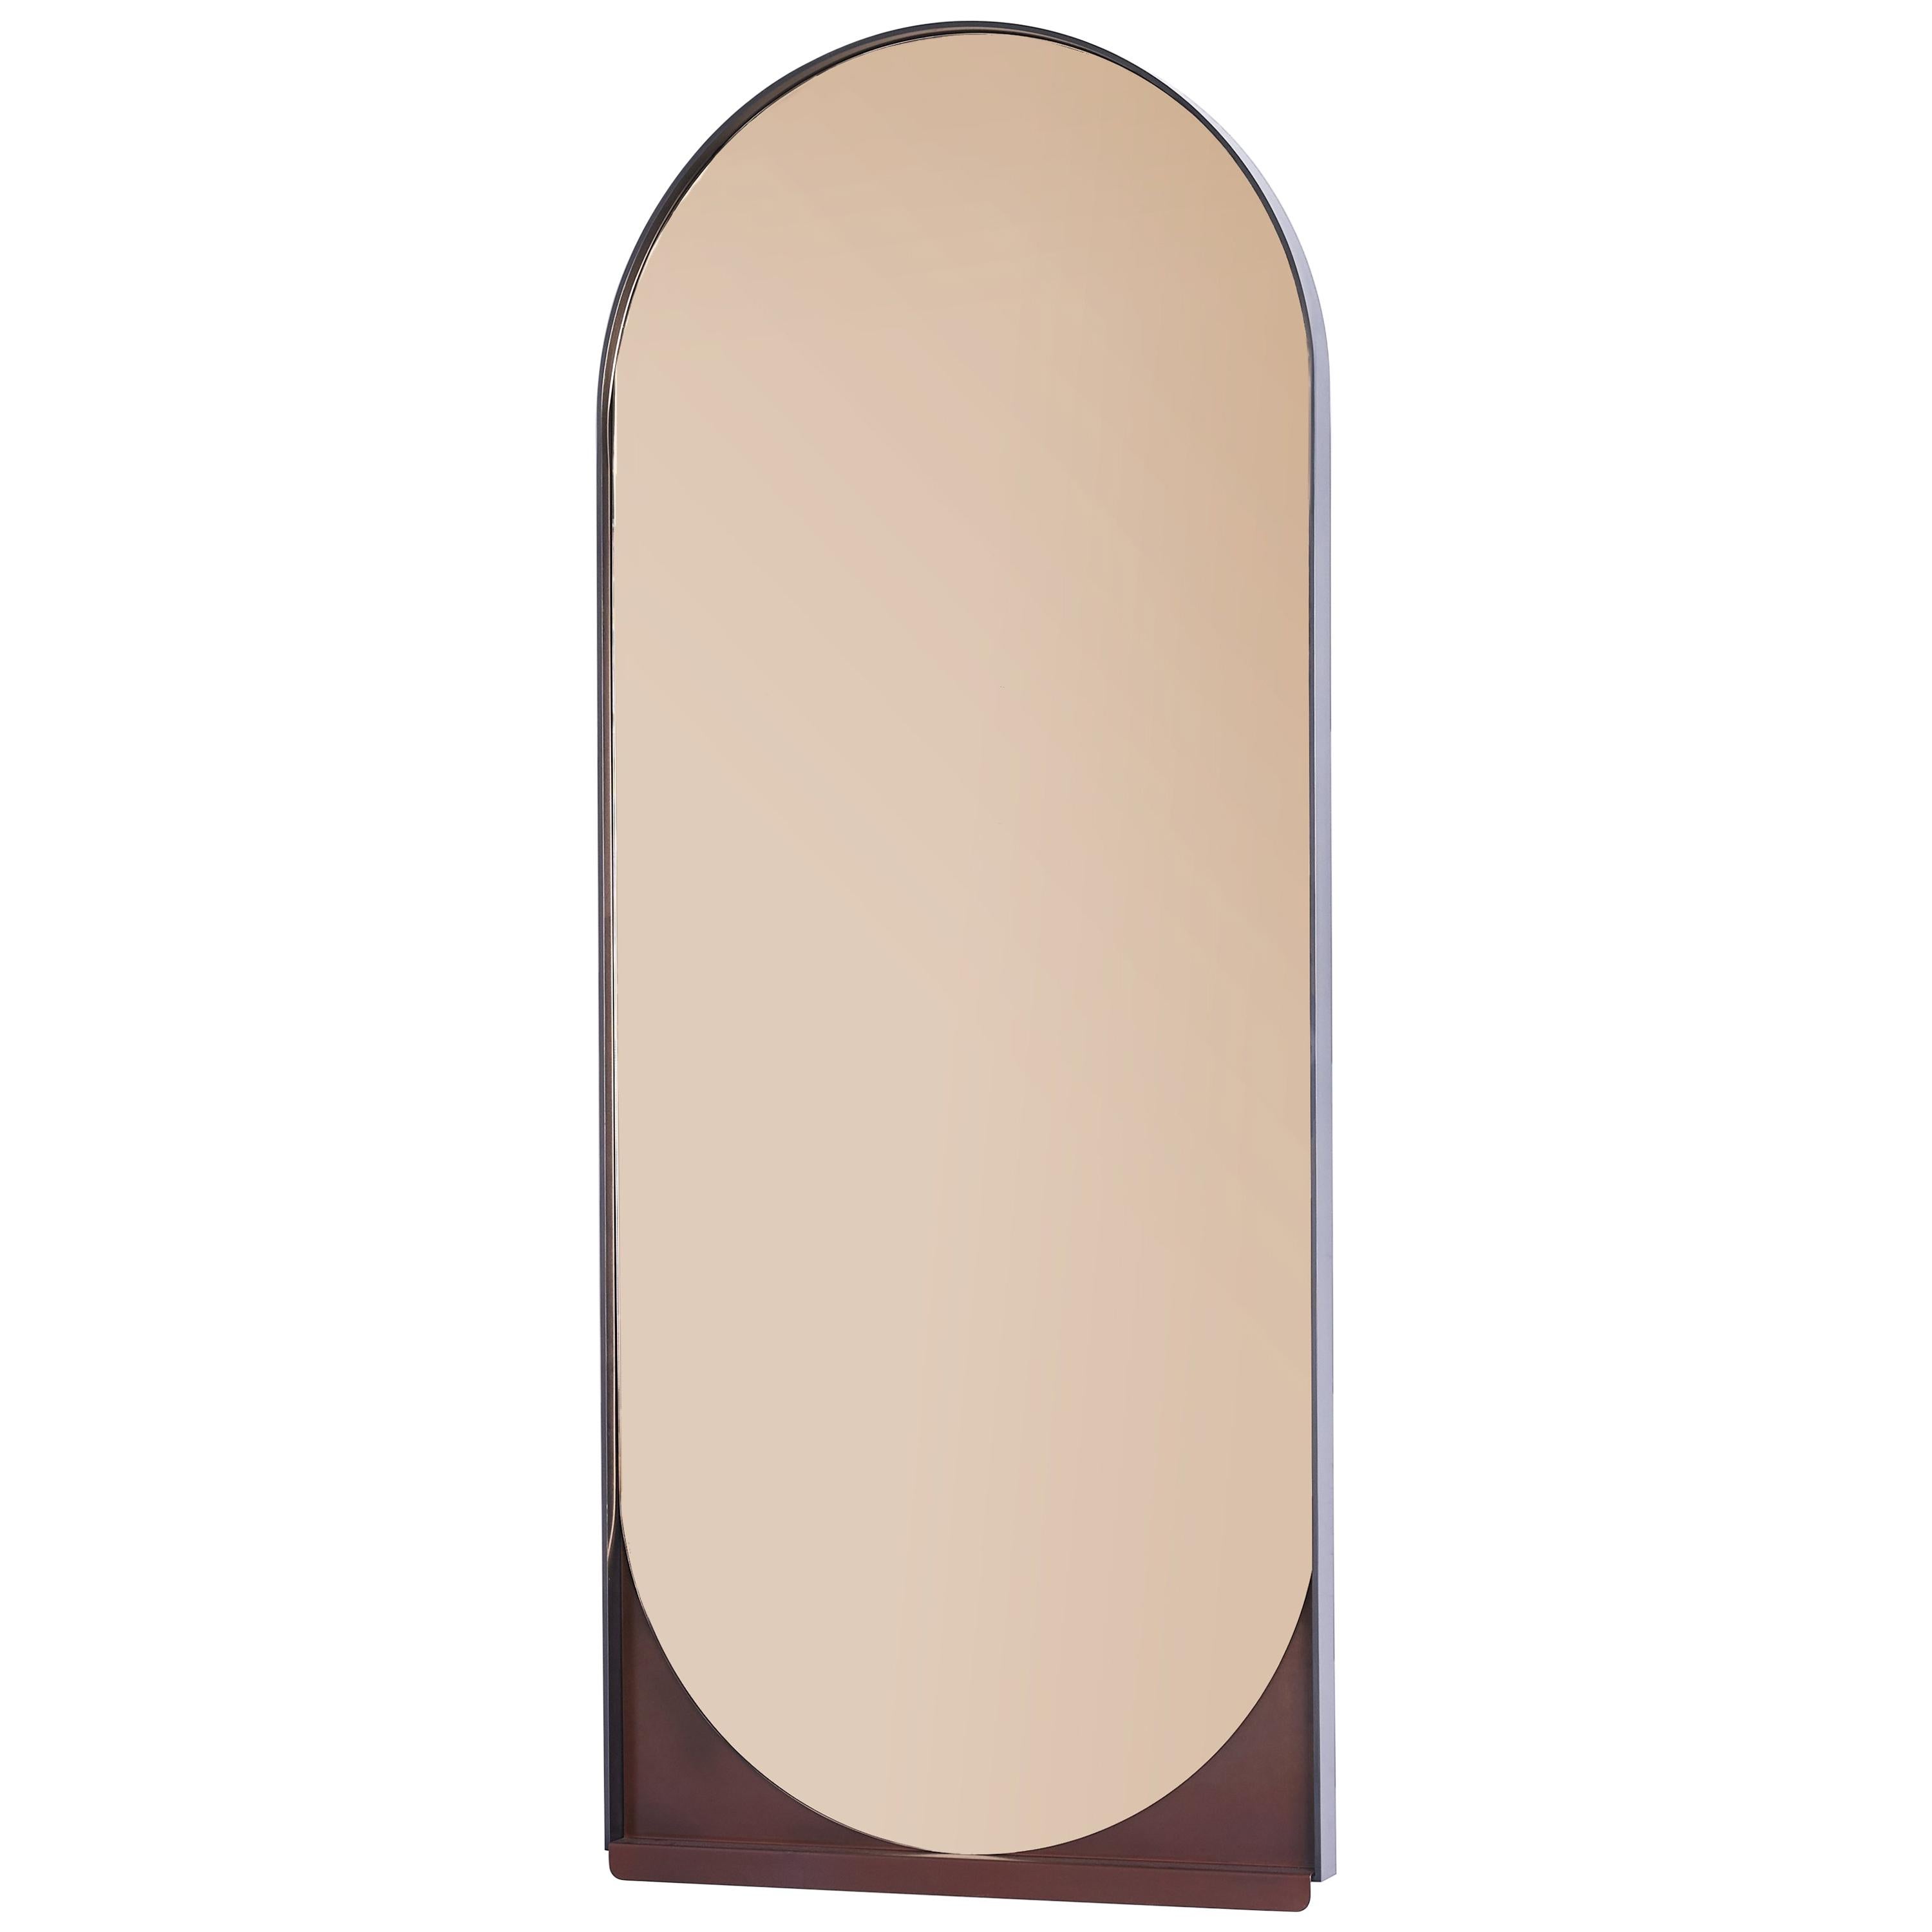 Slip Mirror in Contemporary Blackened Steel, Red Oxide Inlay, and Peach Mirror